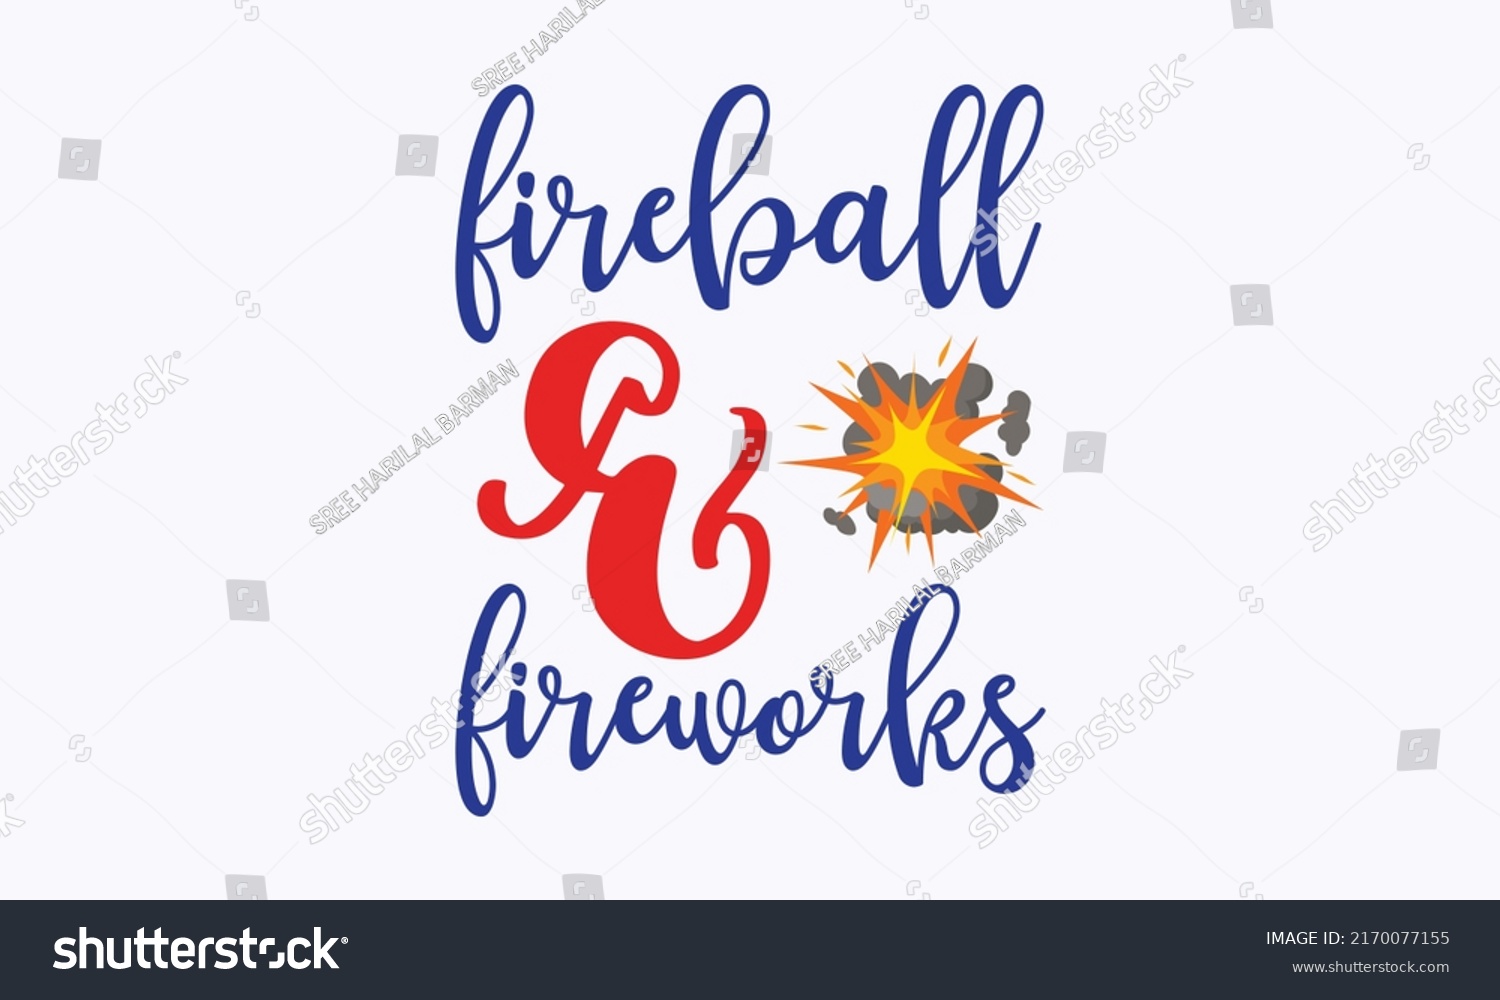 SVG of fireball and fireworks - 4th of July rainbow svg vector image isolated on white background. 4th of July fireworks svg for design shirt and scrapbooking. Good for advertising, poster, templet svg